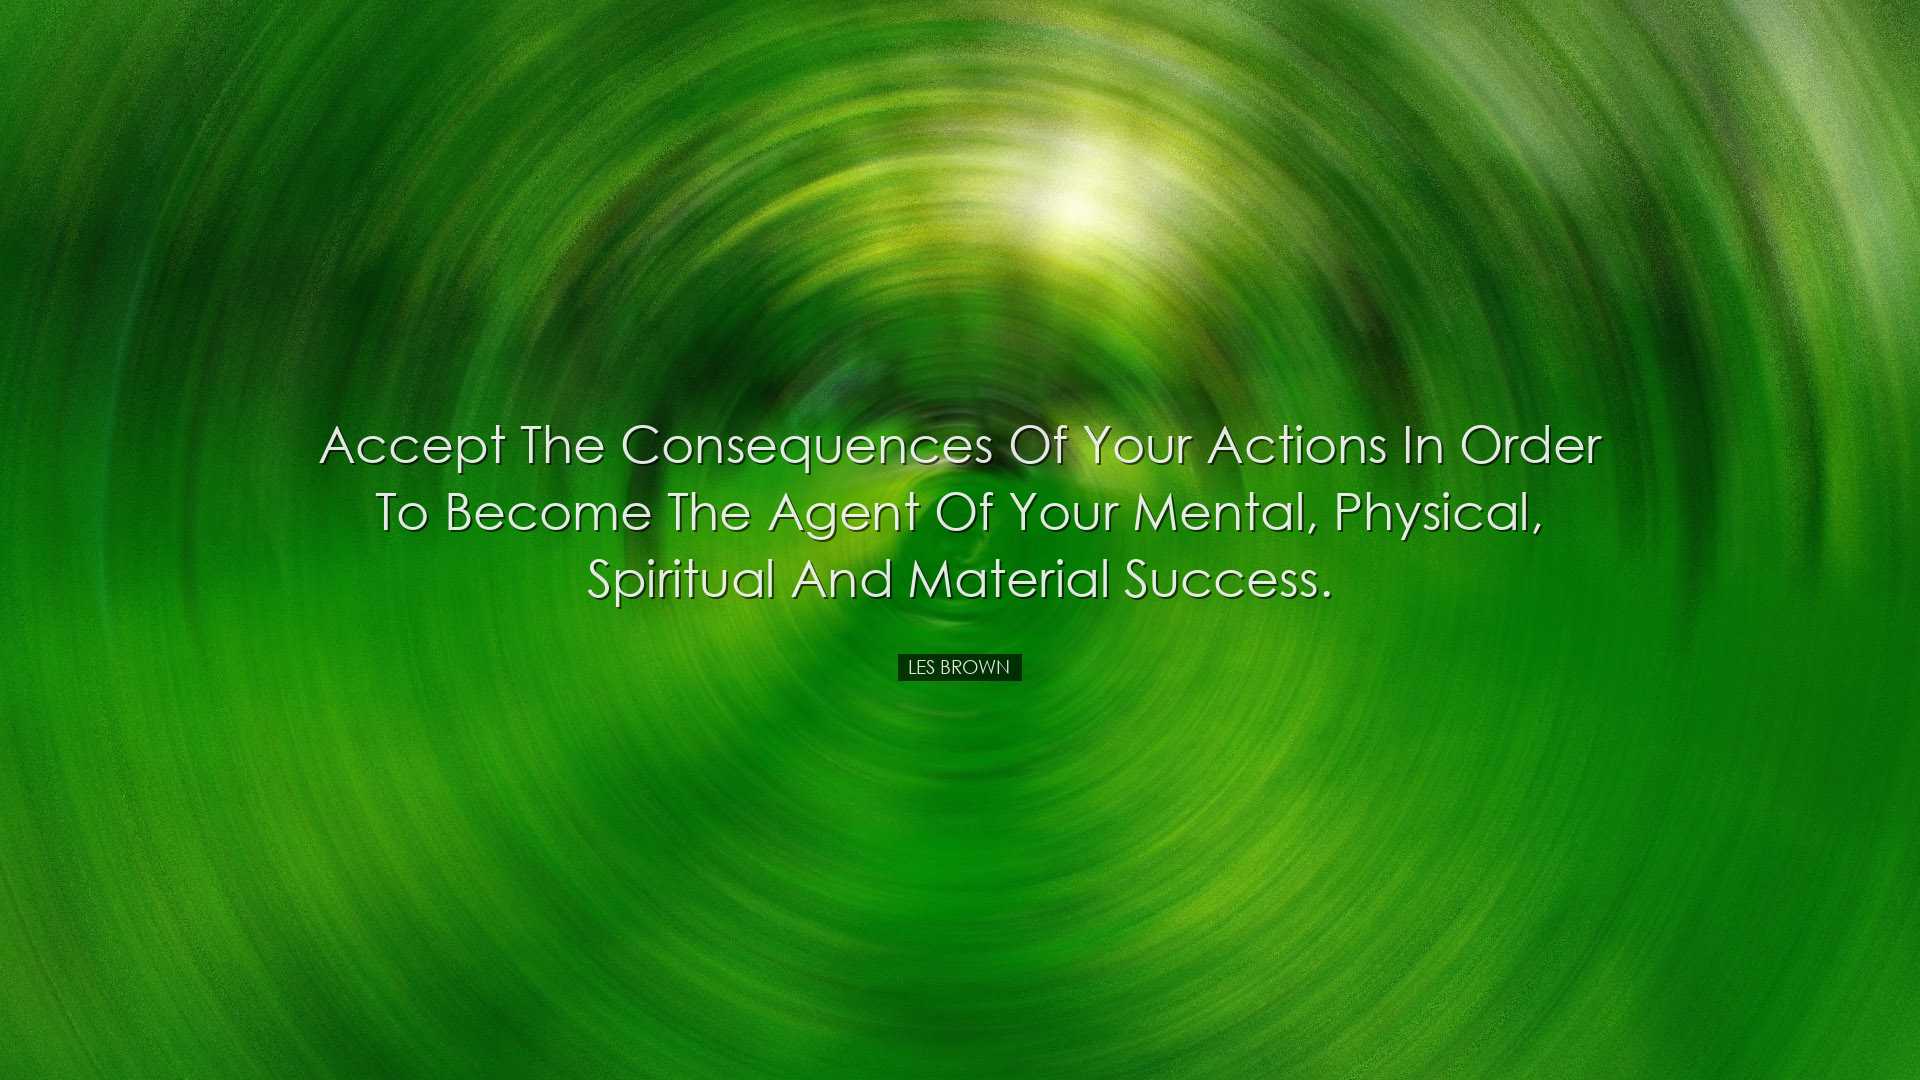 Accept the consequences of your actions in order to become the age